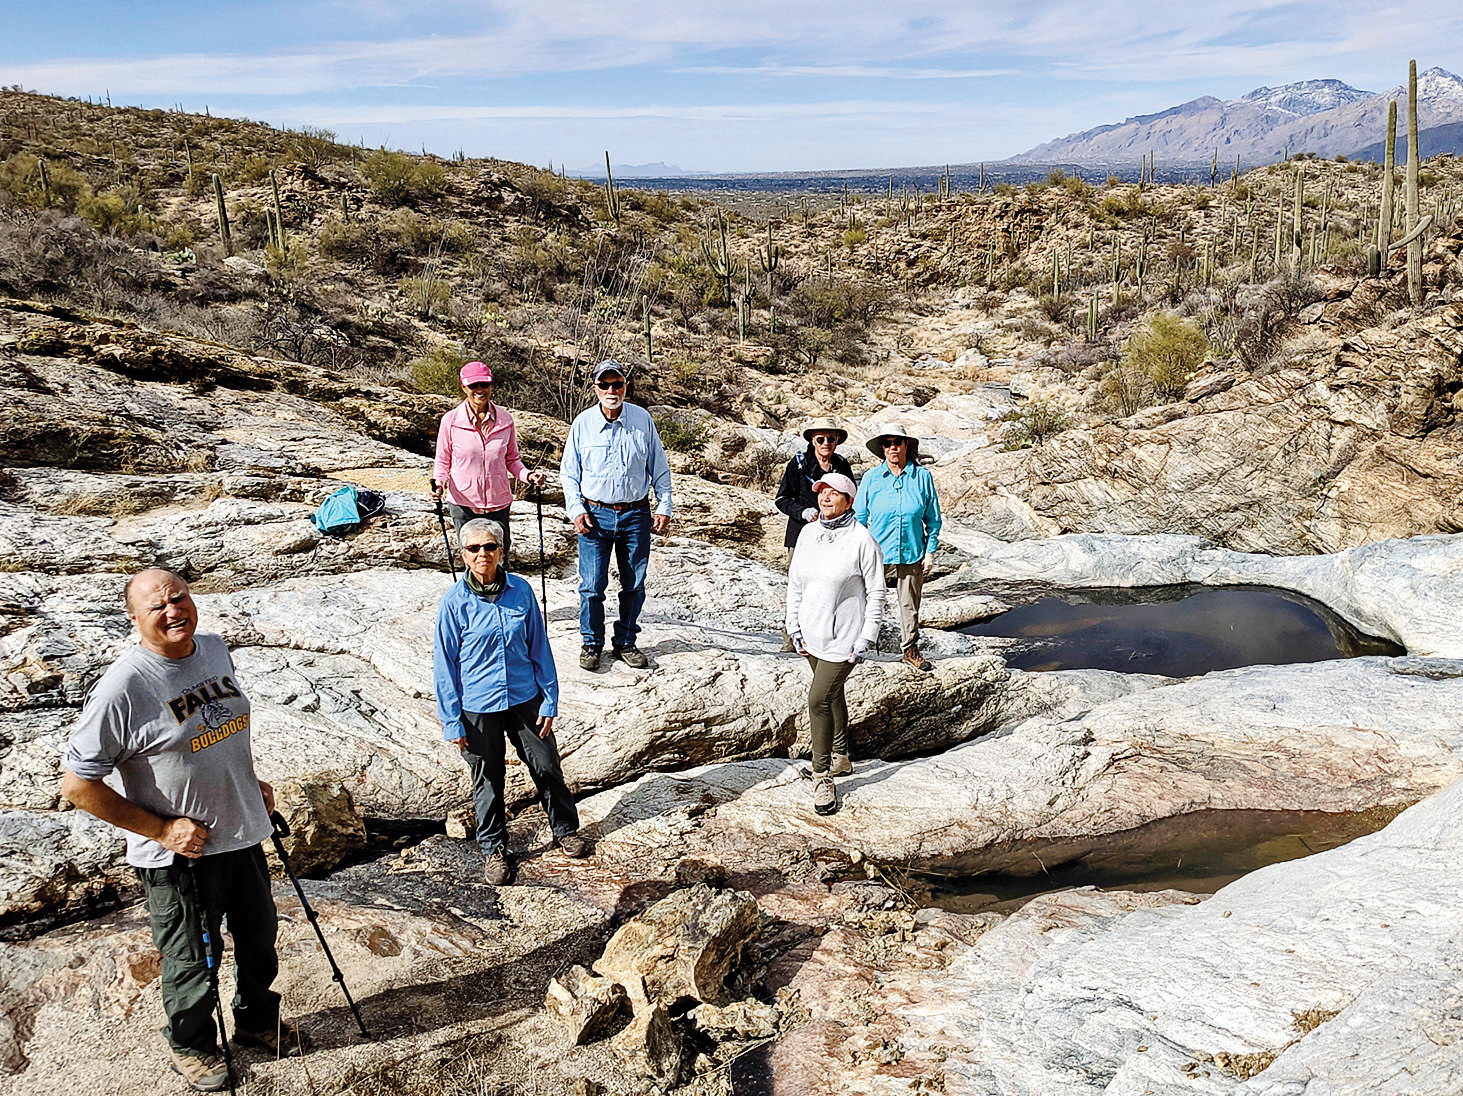 Hikers pause by Little Horse Tank pools. (Photo by Ruth Caldwell)